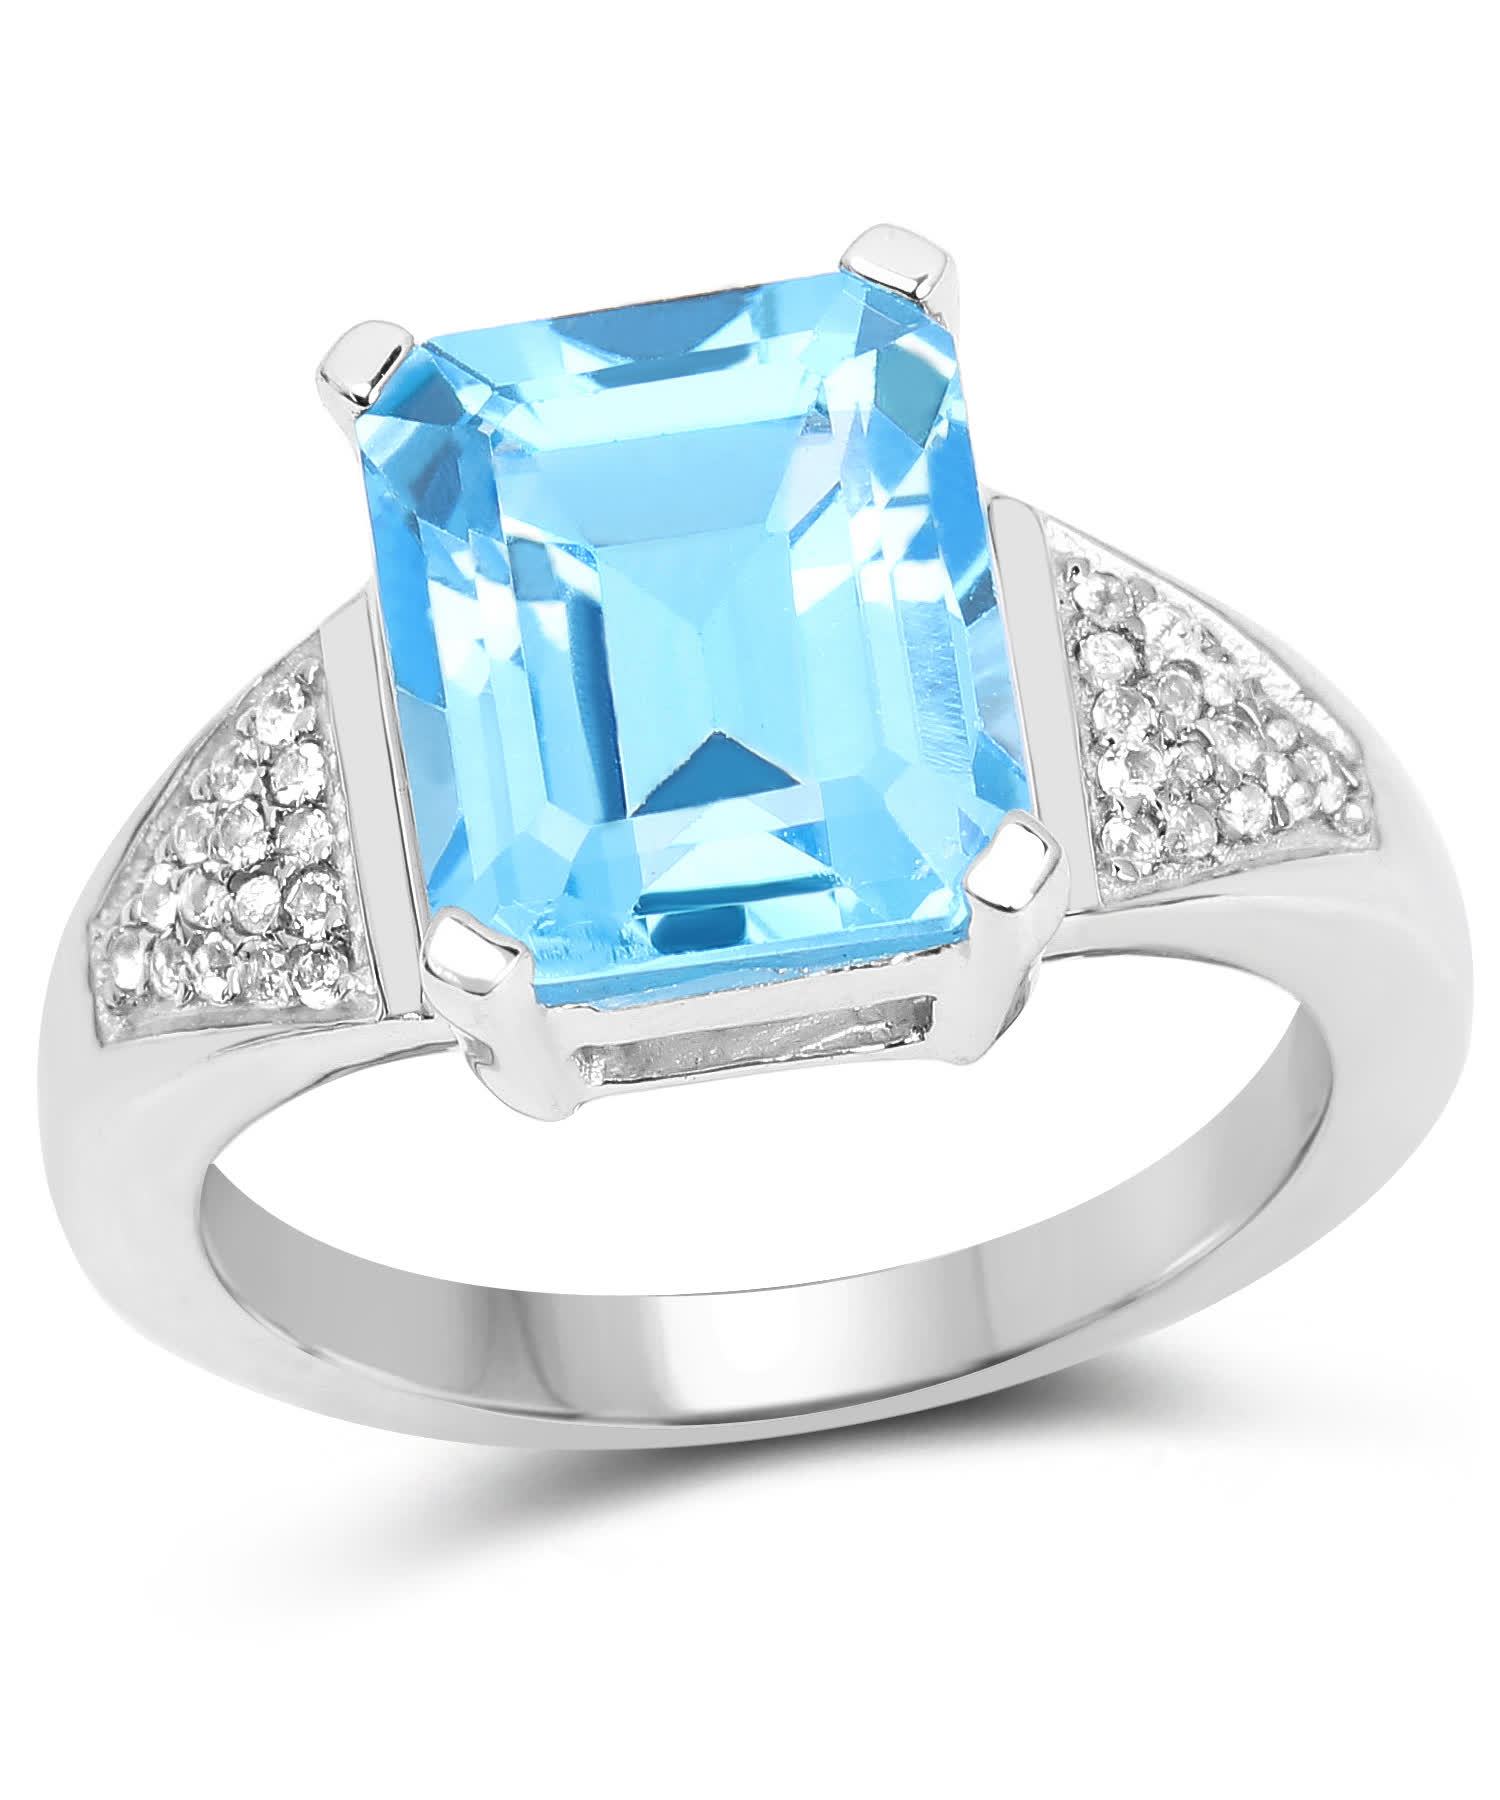 5.85ctw Natural Swiss Blue Topaz Rhodium Plated 925 Sterling Silver Cocktail Ring View 1